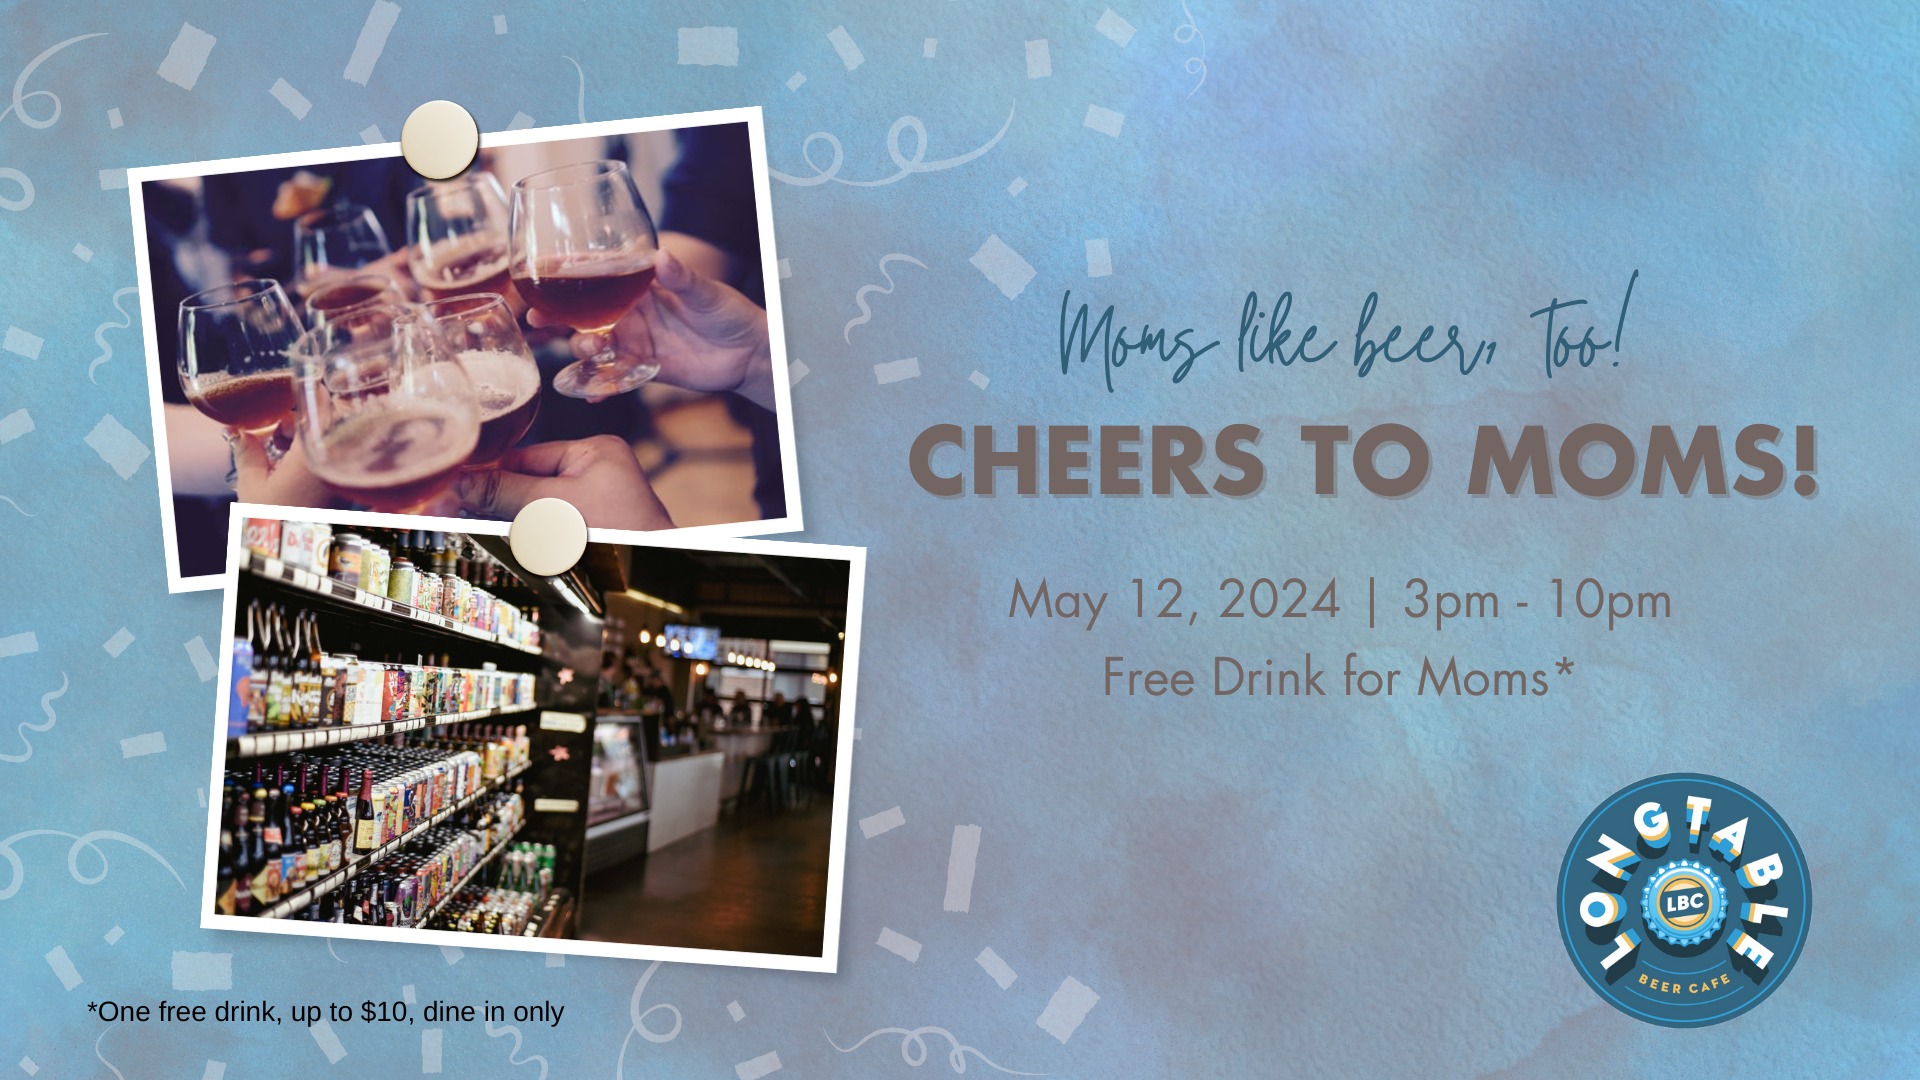 Promotional graphic for a mother's day event at a bar, featuring images of beer glasses and a beer aisle, with text offering a free drink for moms on may 12, 2024.